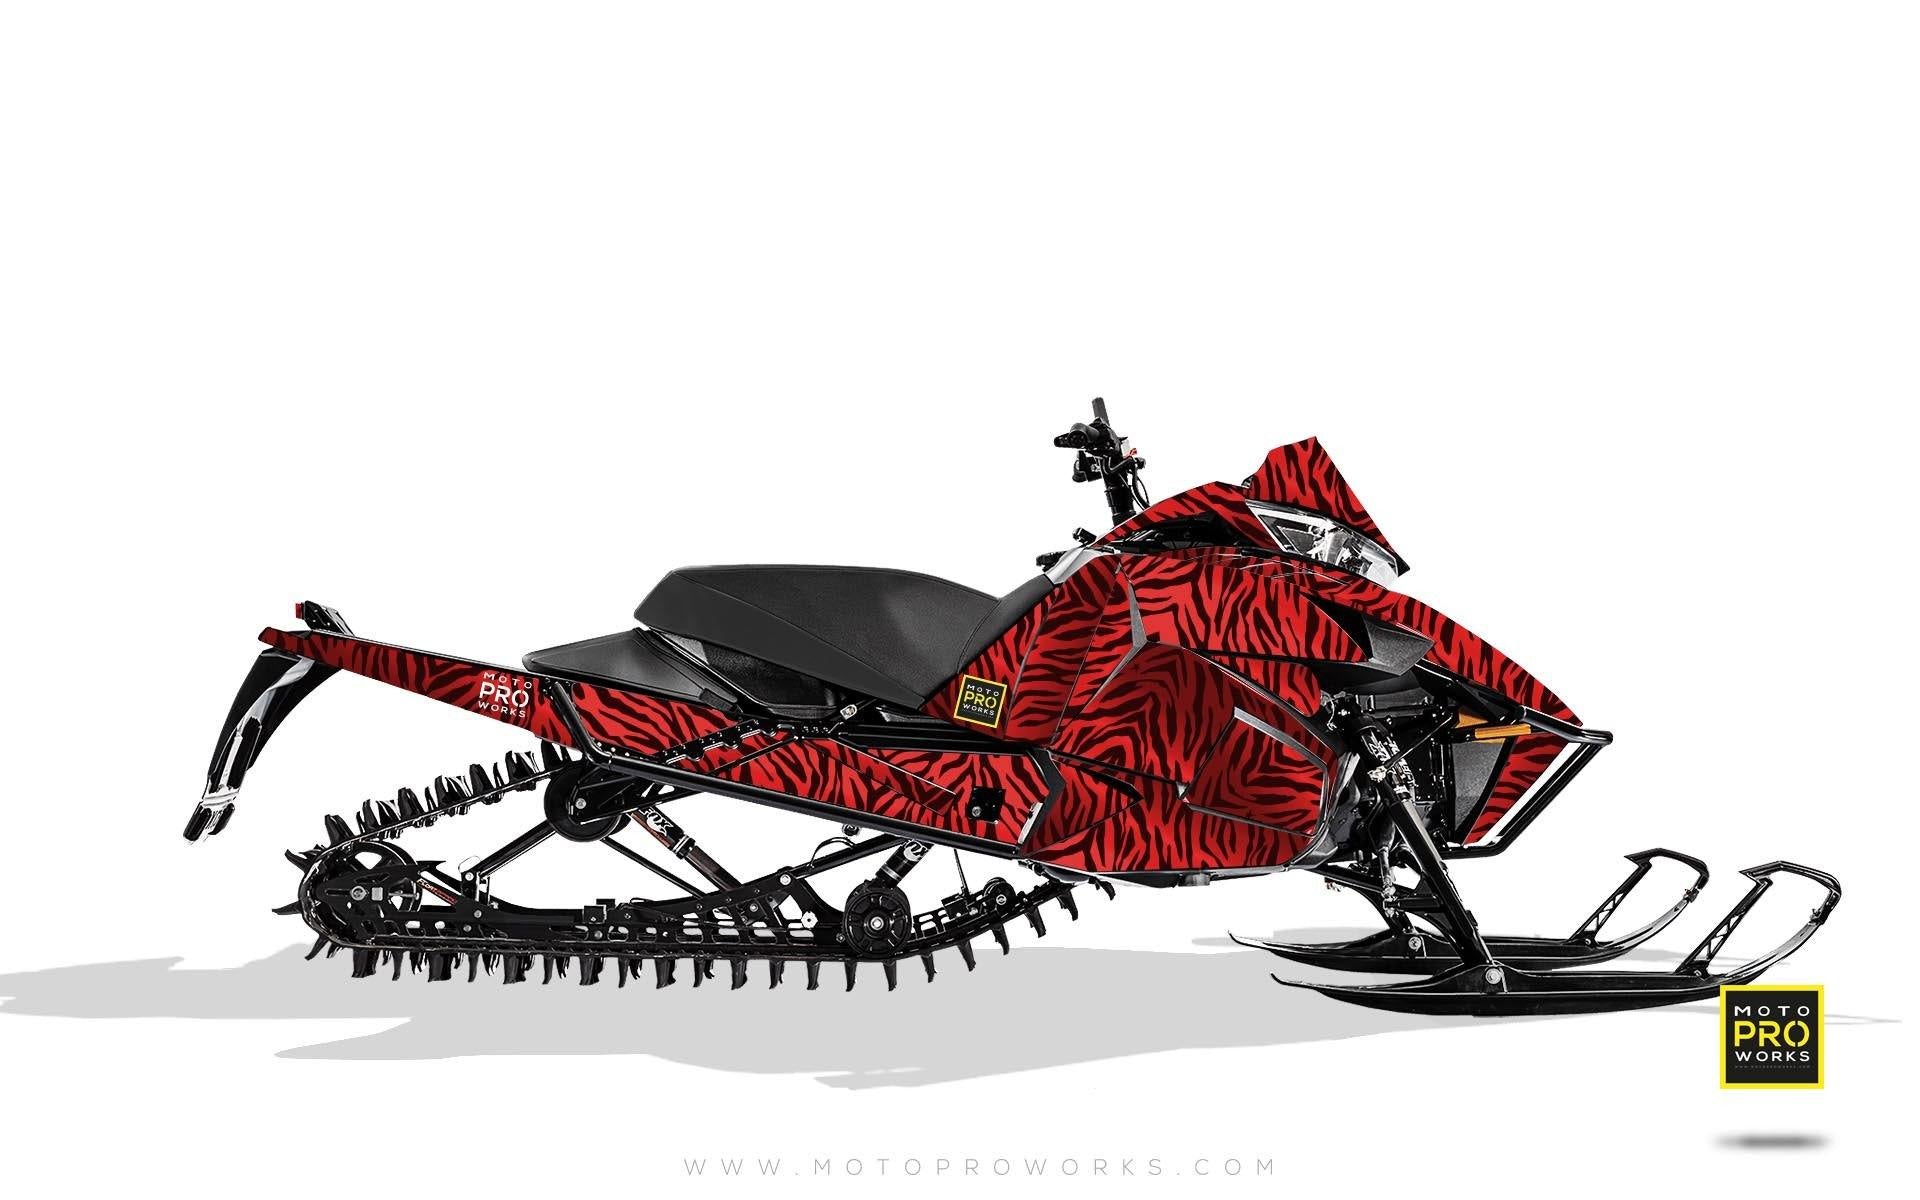 Arctic Cat Graphics - "Stripey" (red) - MotoProWorks | Decals and Bike Graphic kit